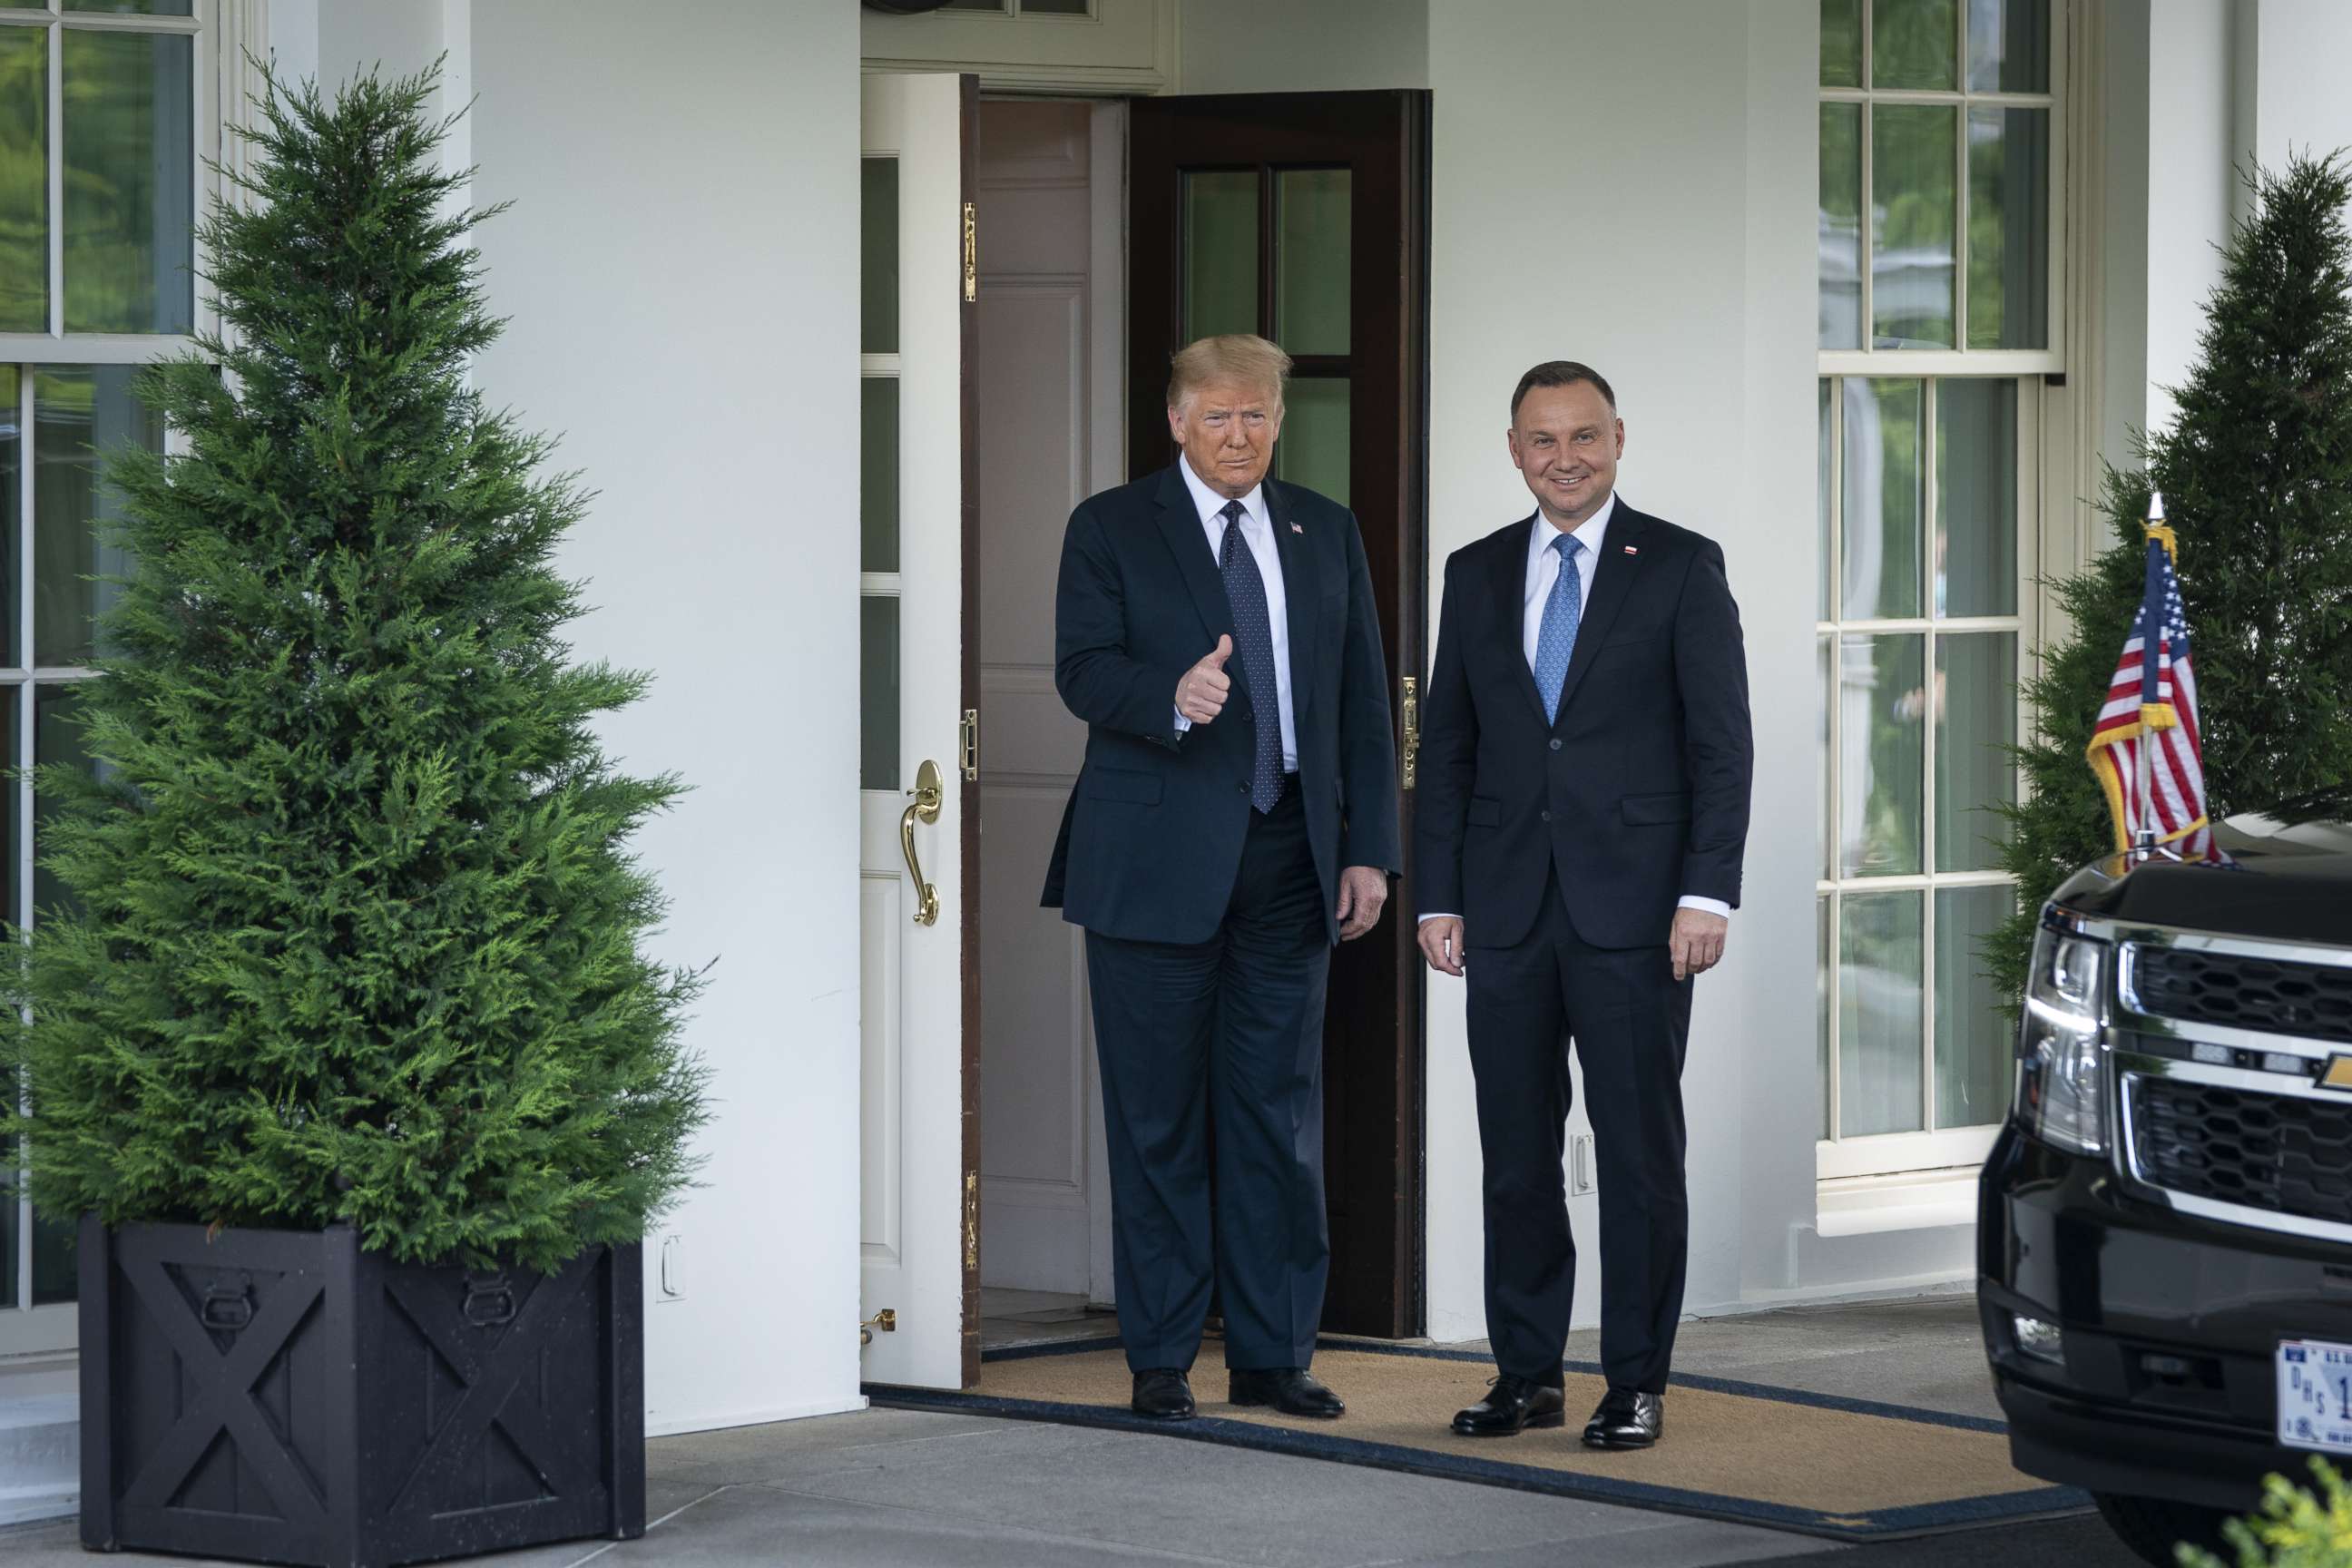 PHOTO: President Donald Trump greets Polish President Andrzej Duda as he arrives at the West Wing of the White House on June 24, 2020 in Washington, DC.